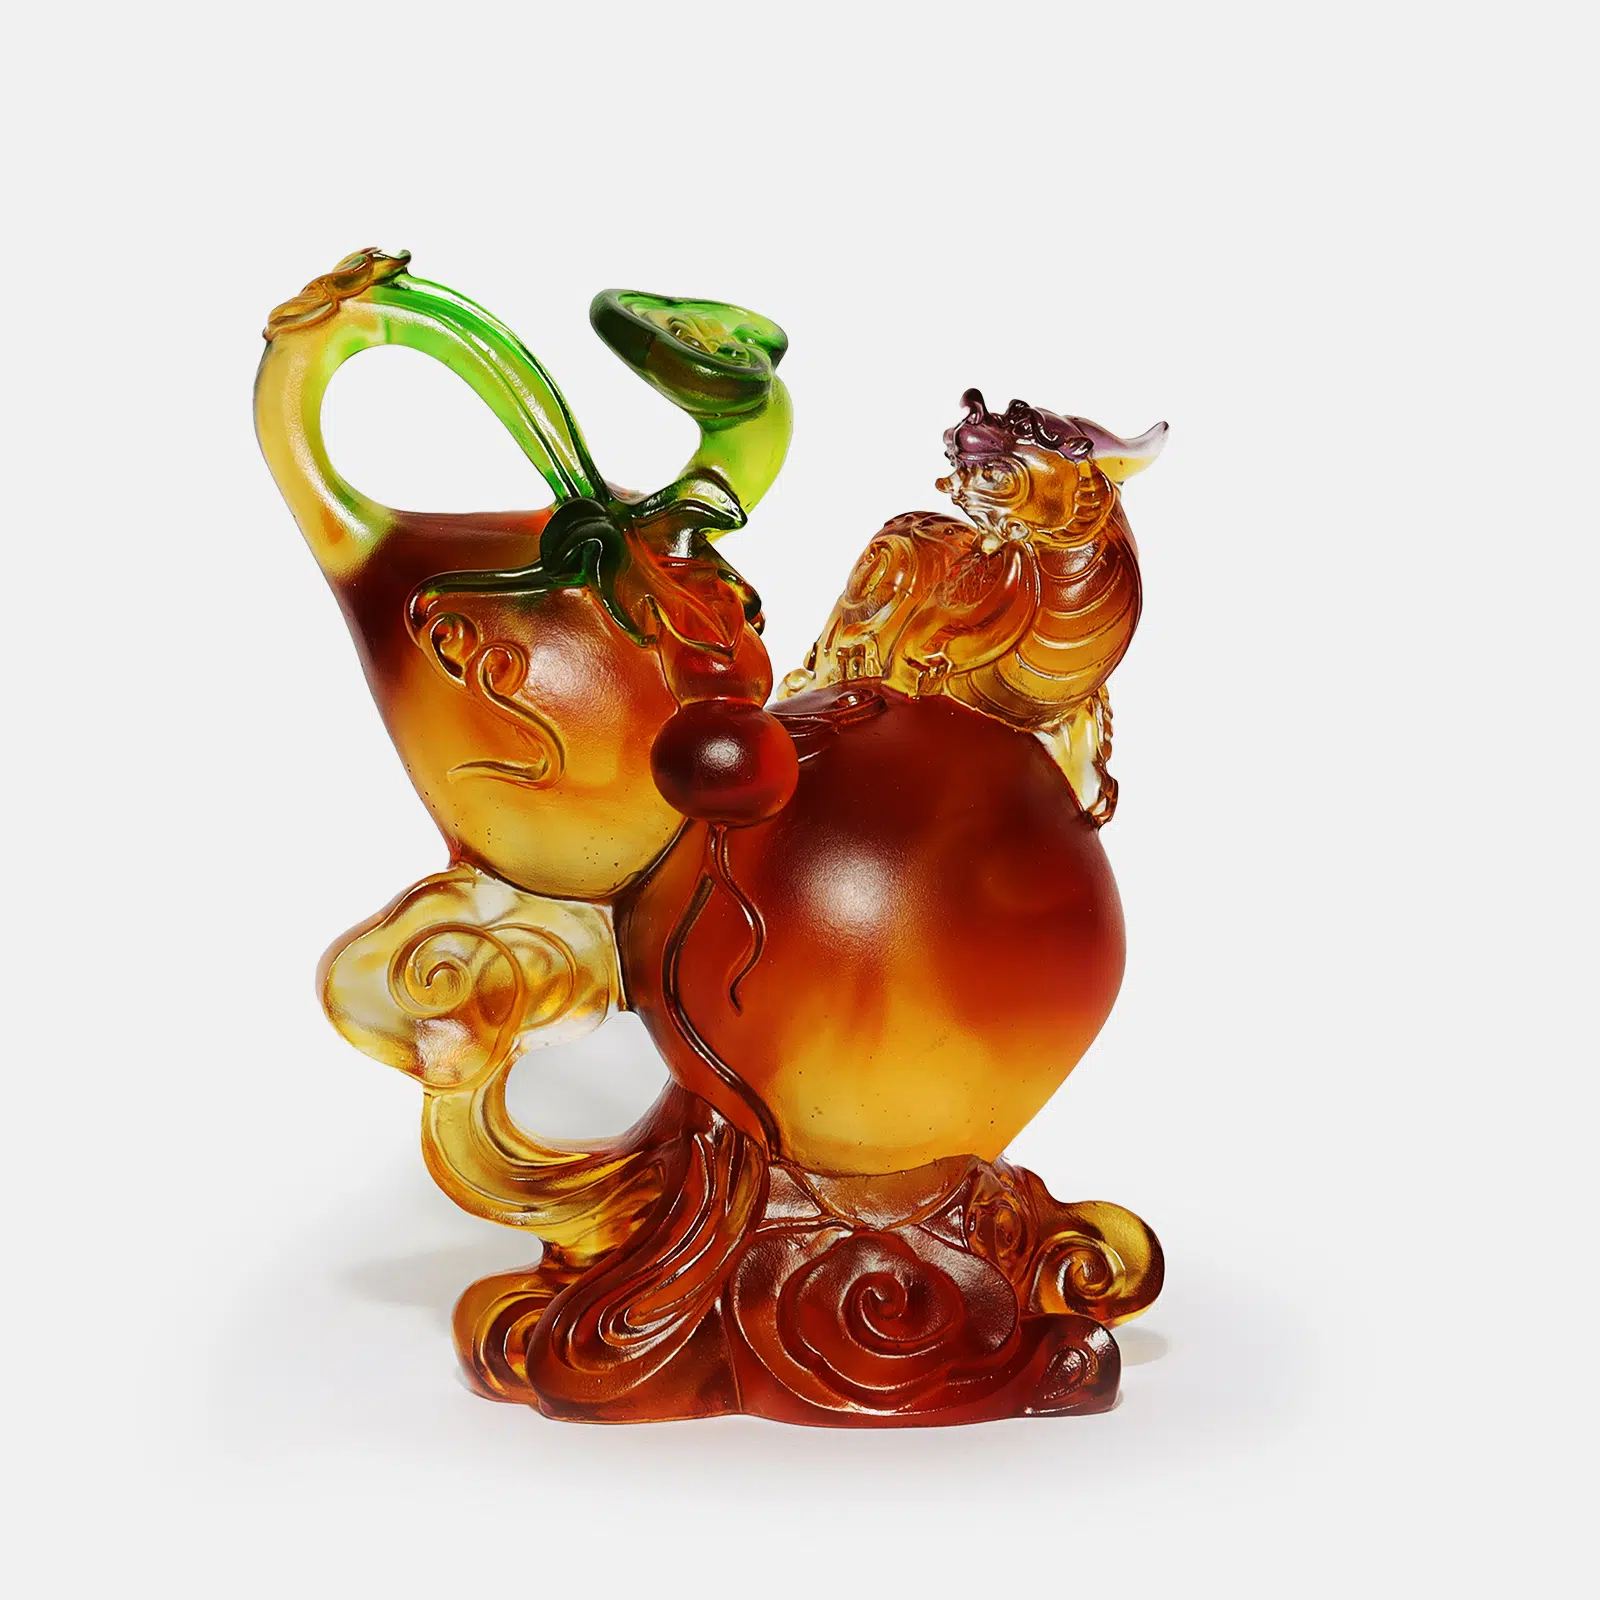 Crystal-Feng-Shui-Lucky-Quilin-Riding-Wine-Gourd-Statue -HC330121